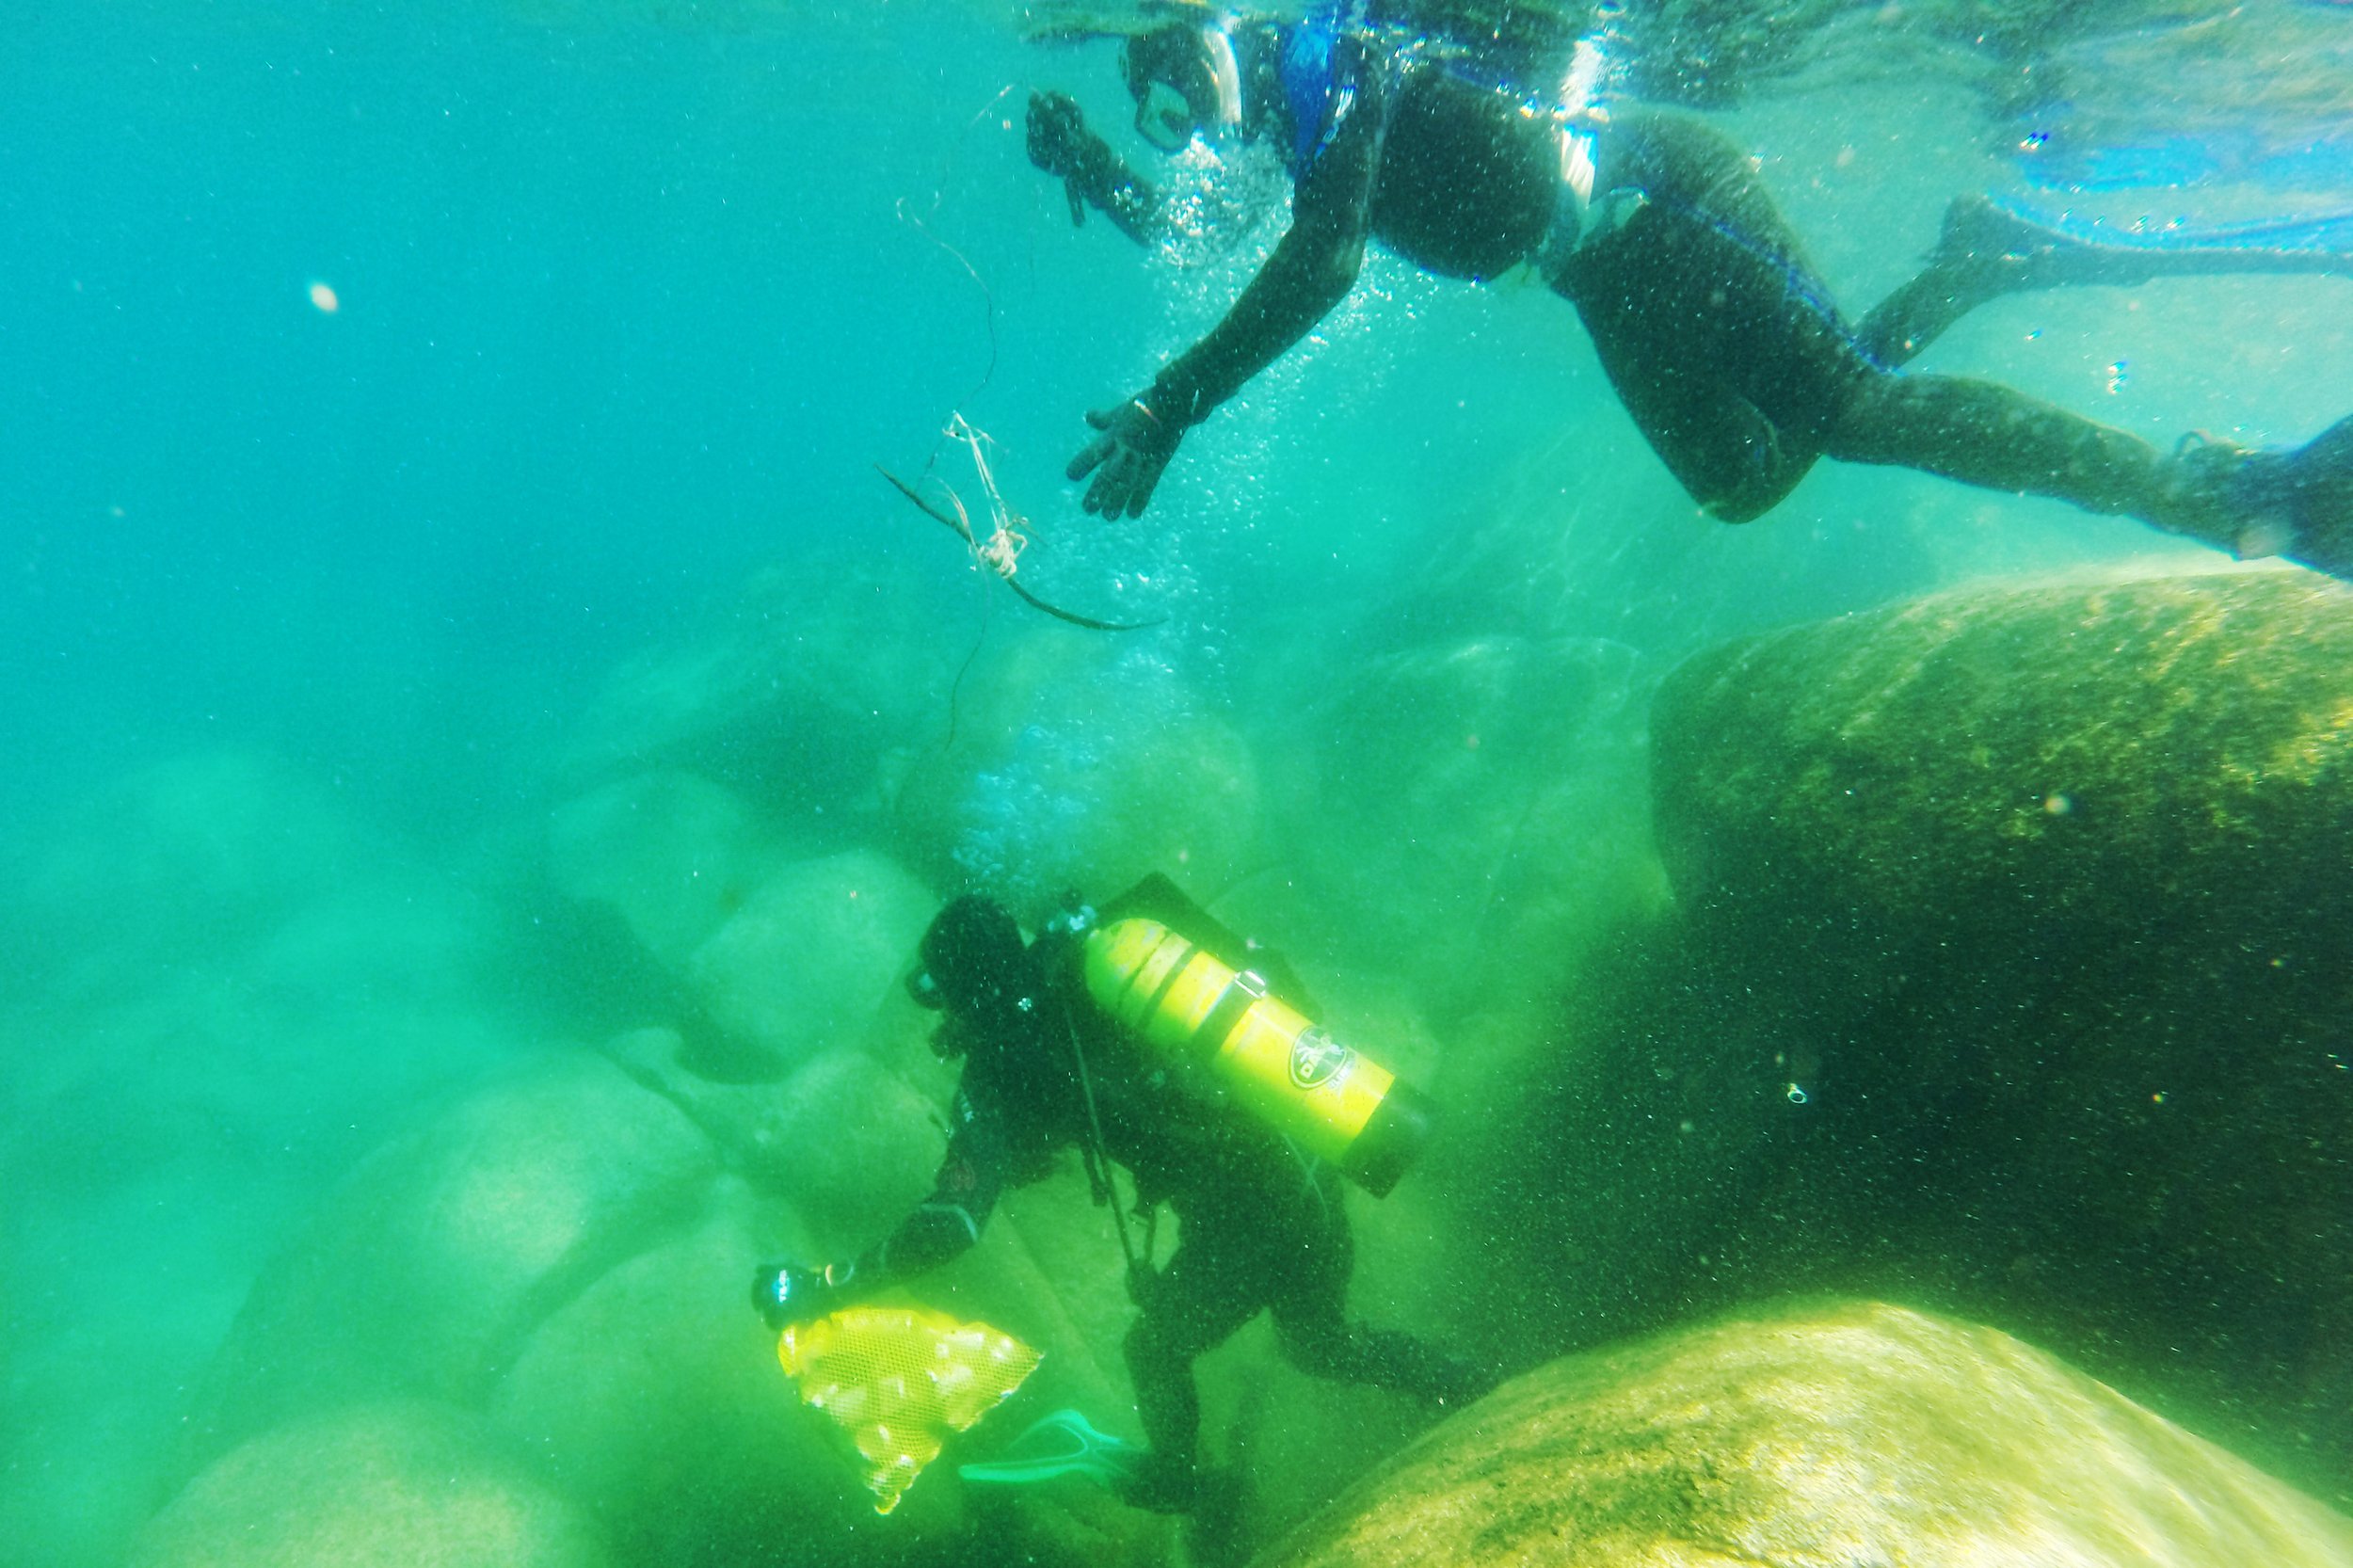  Divers from Clean Up the Lake, a Lake Tahoe, Ca. based non-profit specializing in removing litter and other human-made waste from the iconic body of water, go down for a dive on Aug. 2, 2021. The team successfully removed over 25,000 lbs. of trash c